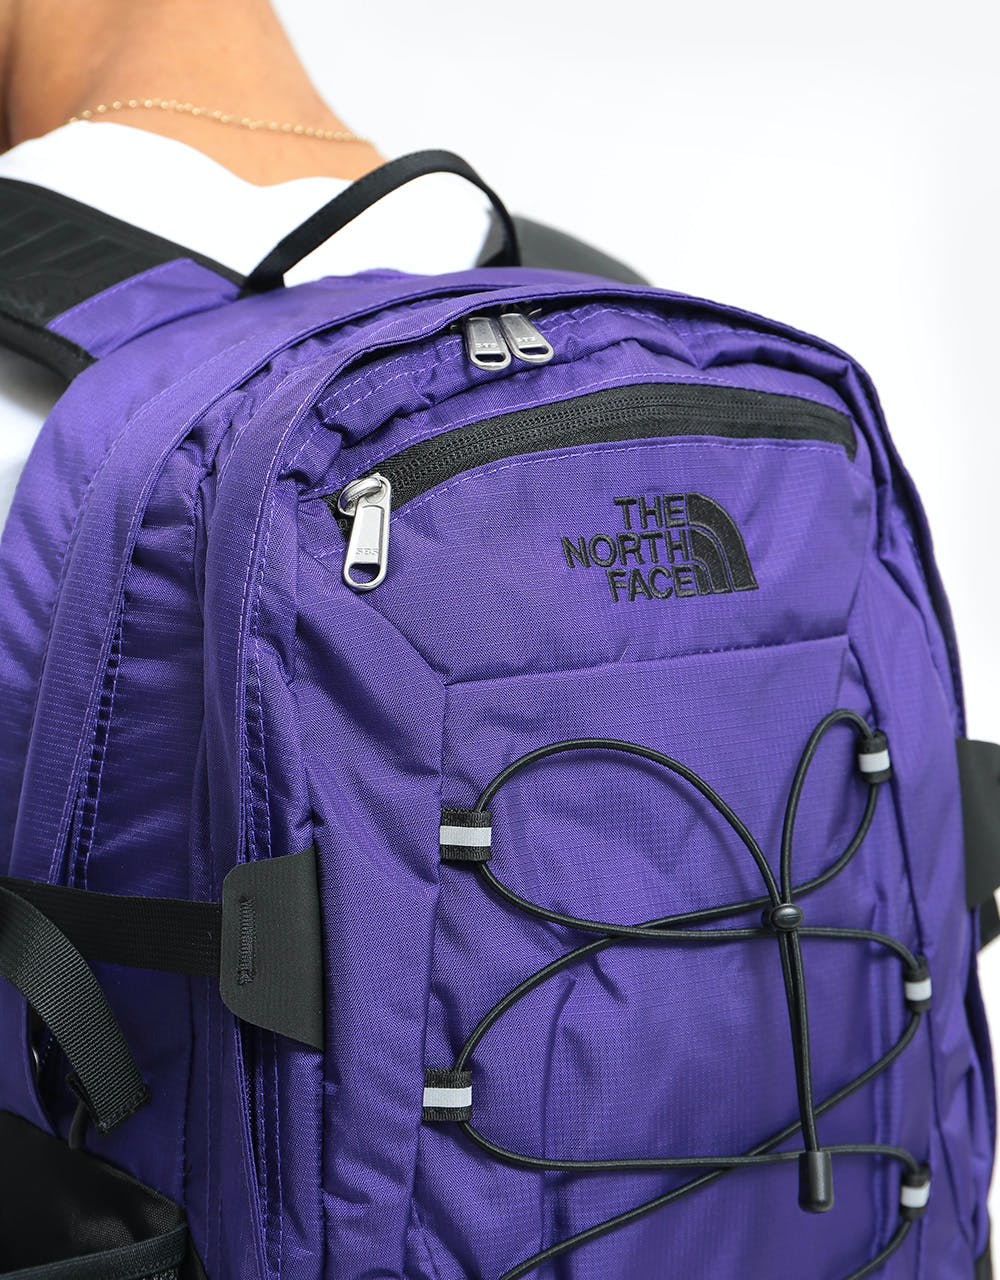 The North Face Borealis Classic Backpack - Peak Purple Ripstop – Route One